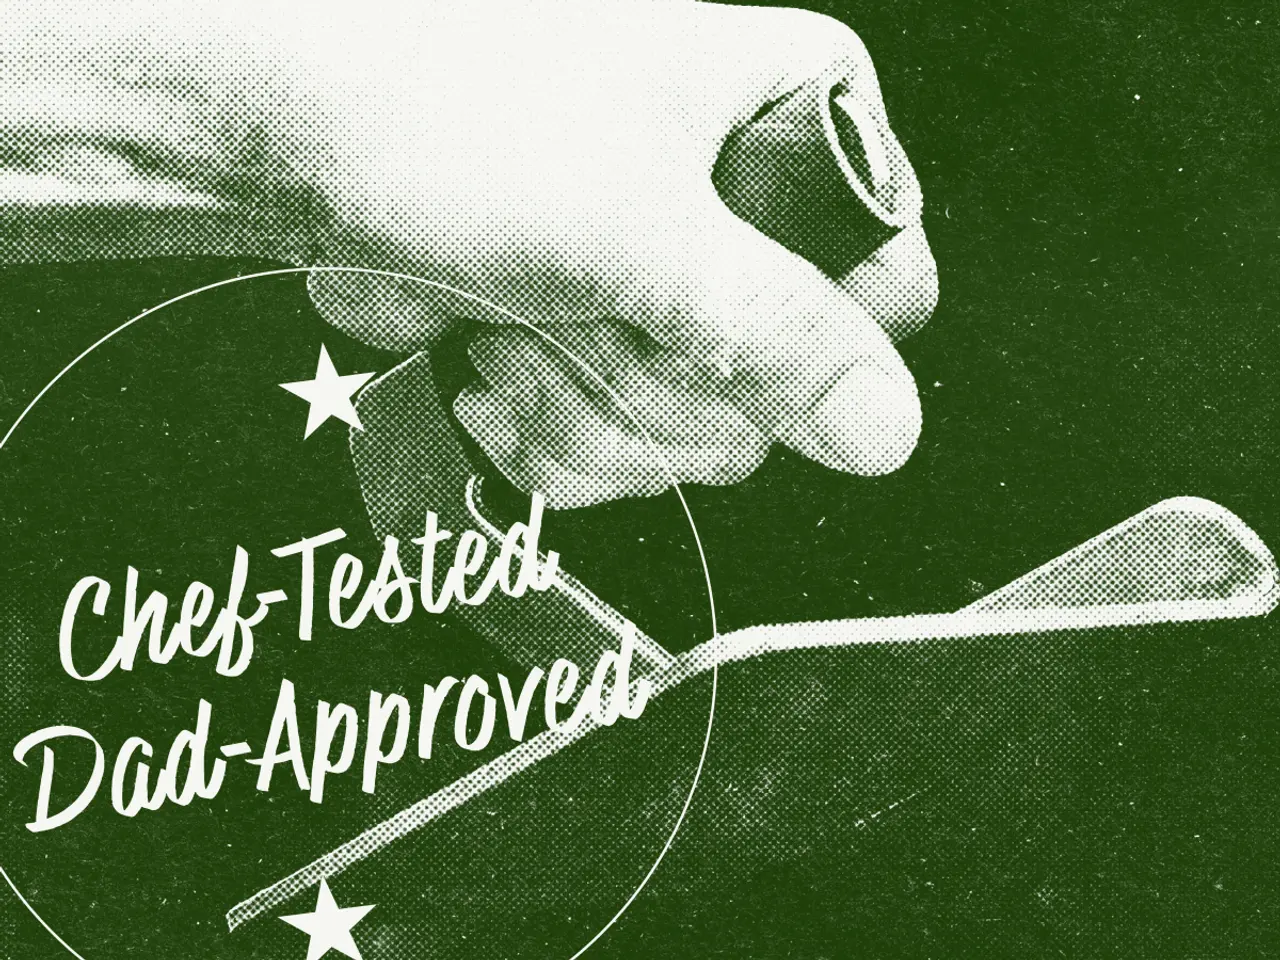 A hand holding a whisk with the words "Chef-Tested Dad-Approved" emblazoned across the image in a retro-style design.